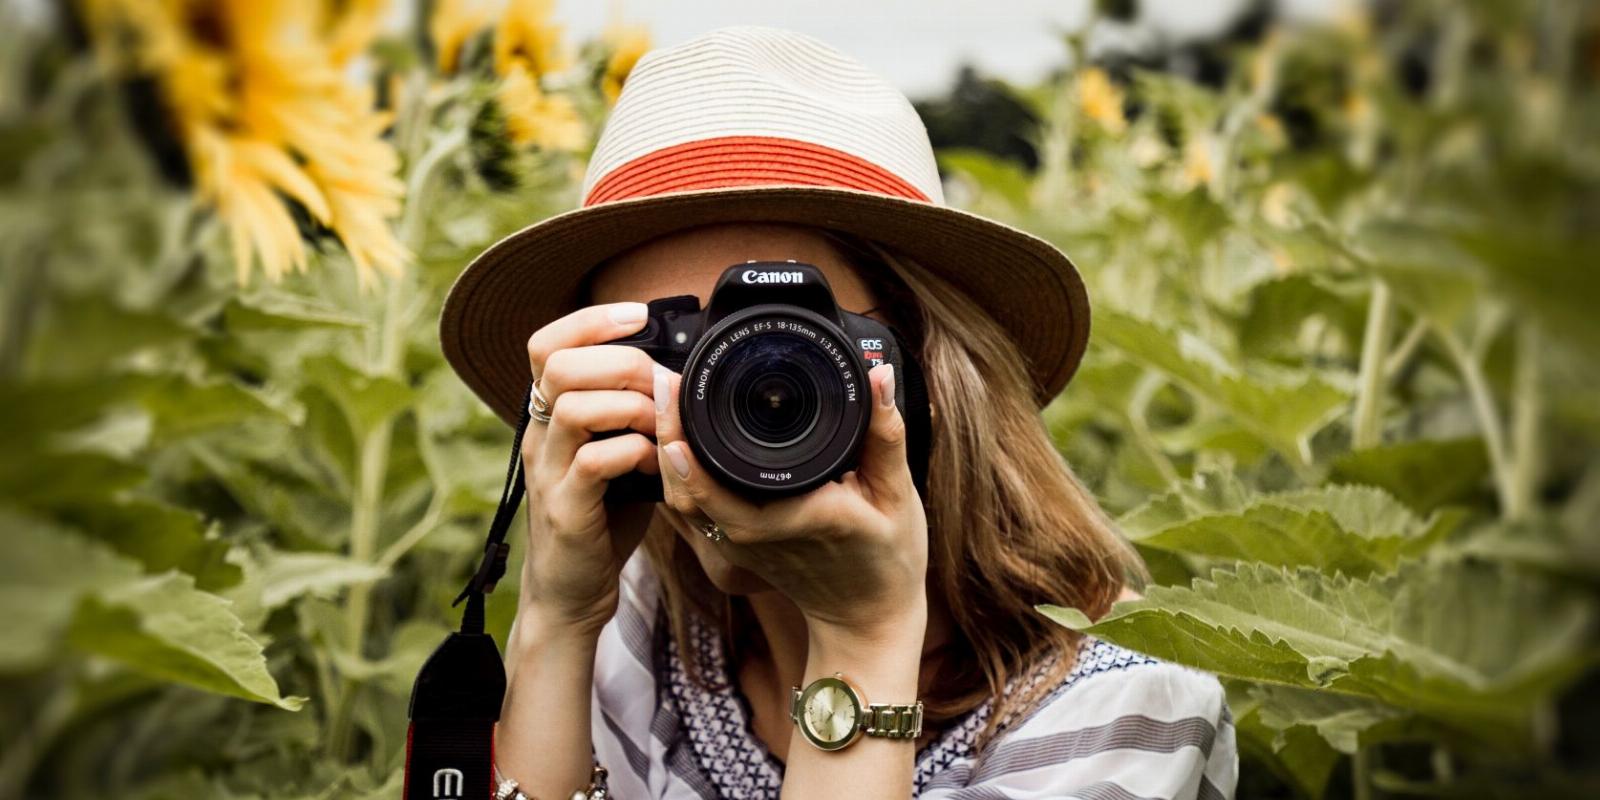 8 Things You Should Do as Soon as You Get a New Camera